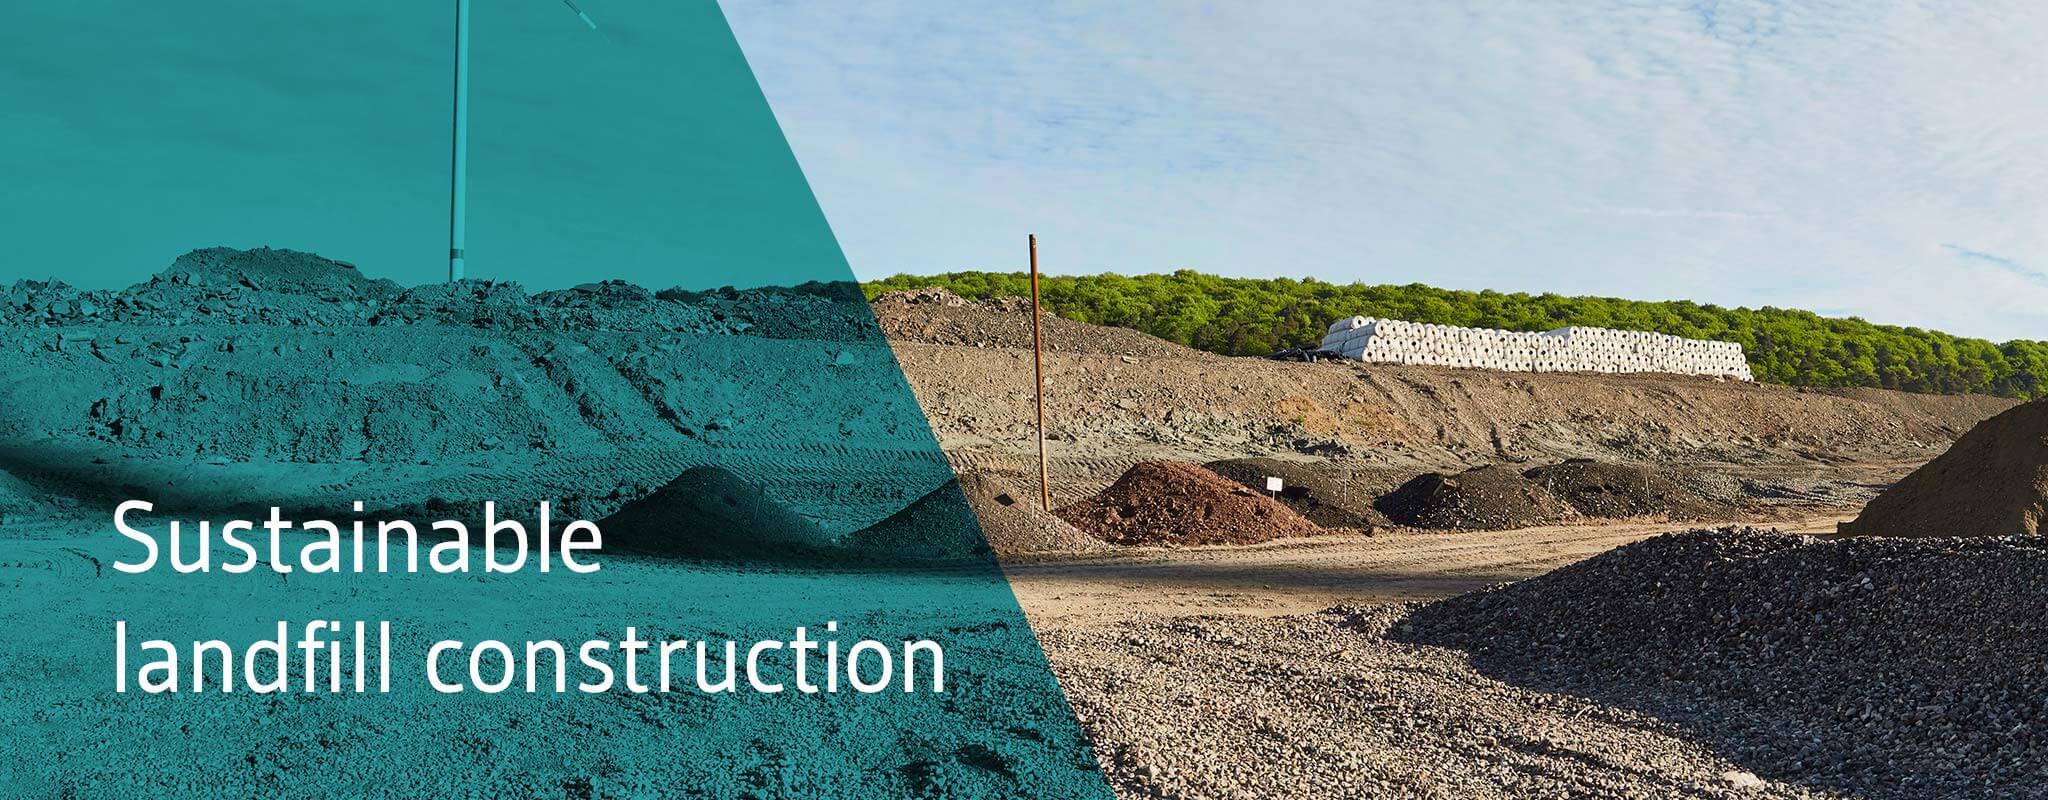 Production and supply of landfill construction materials